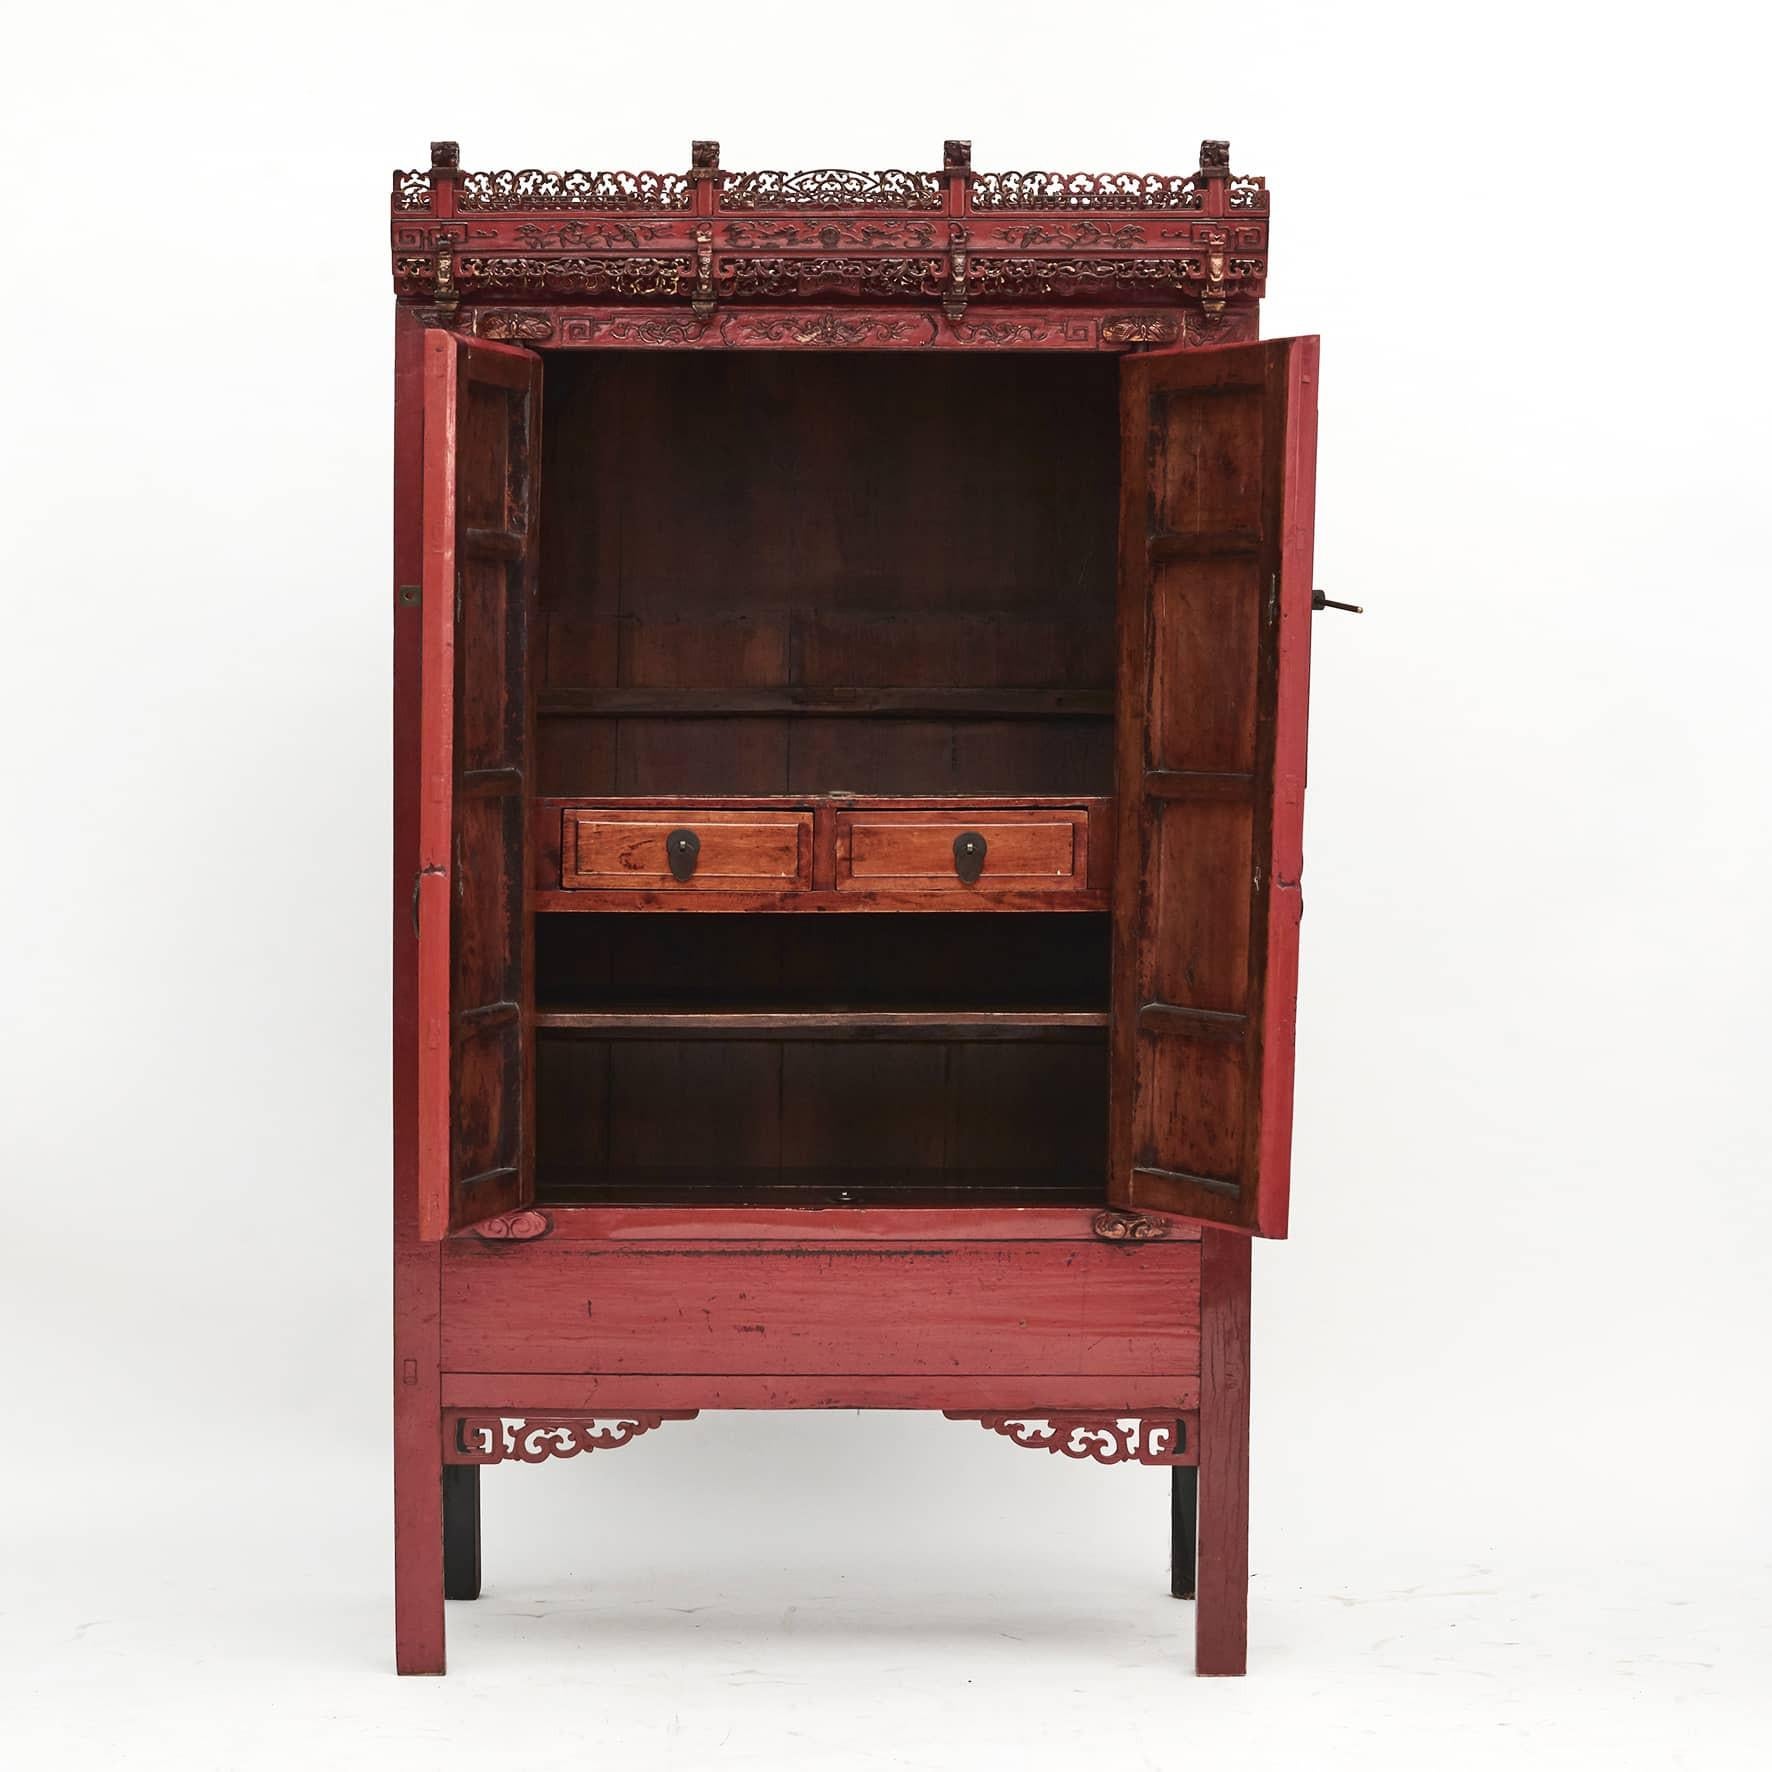 Qing Red Lacquer Wedding Cabinet Fujian Province c 1880.